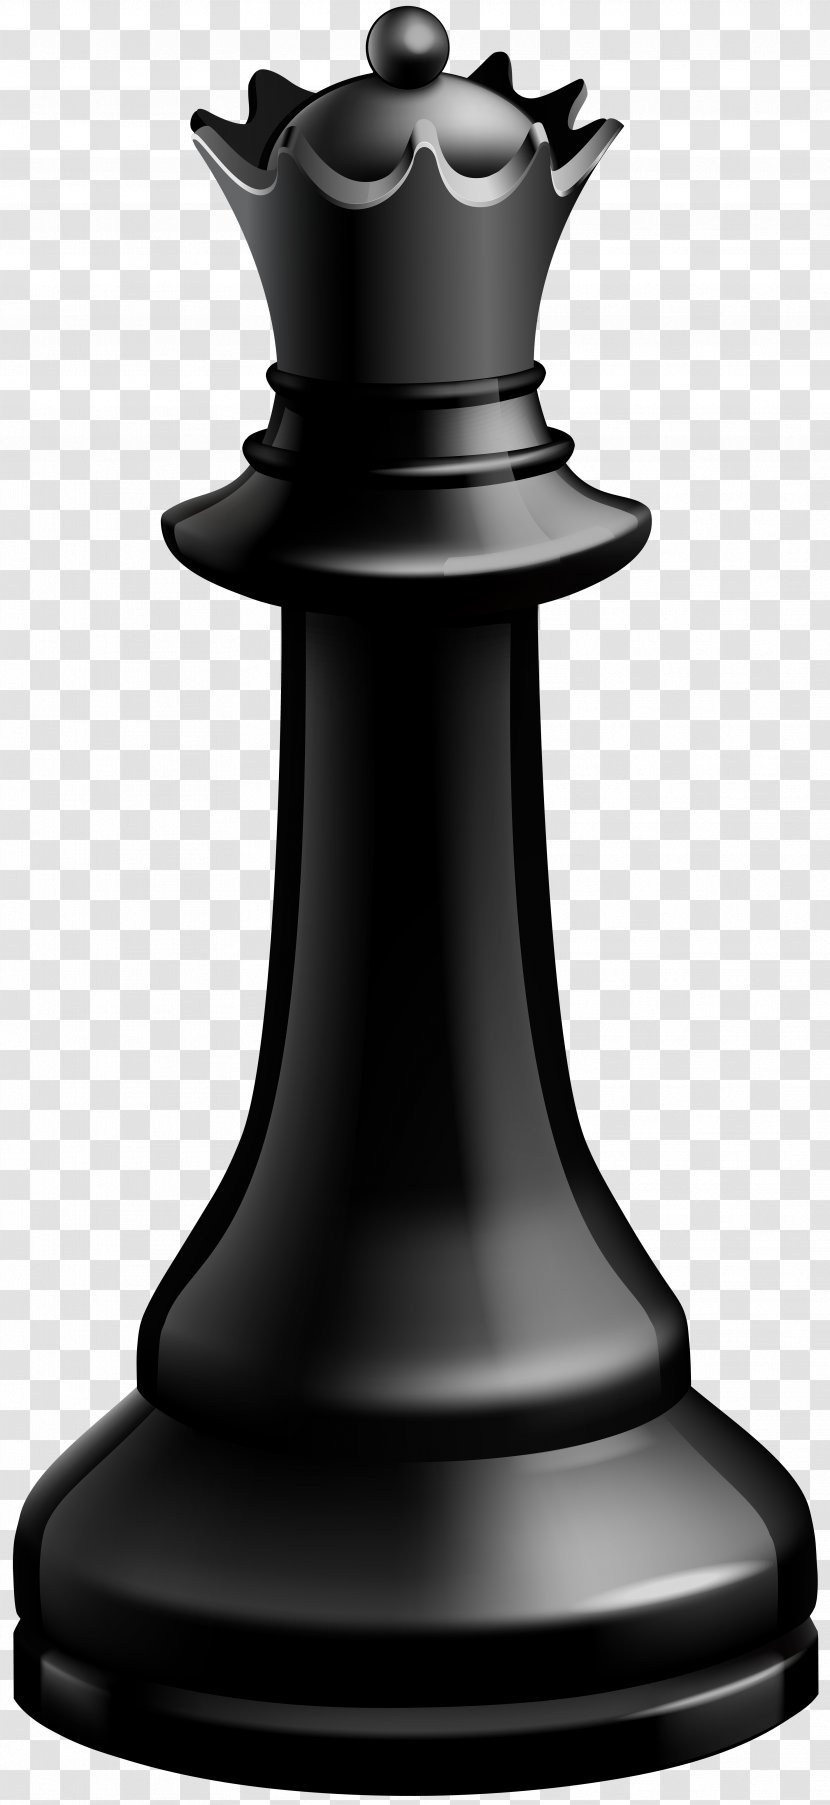 Chess Piece Queen Image Transparent PNG